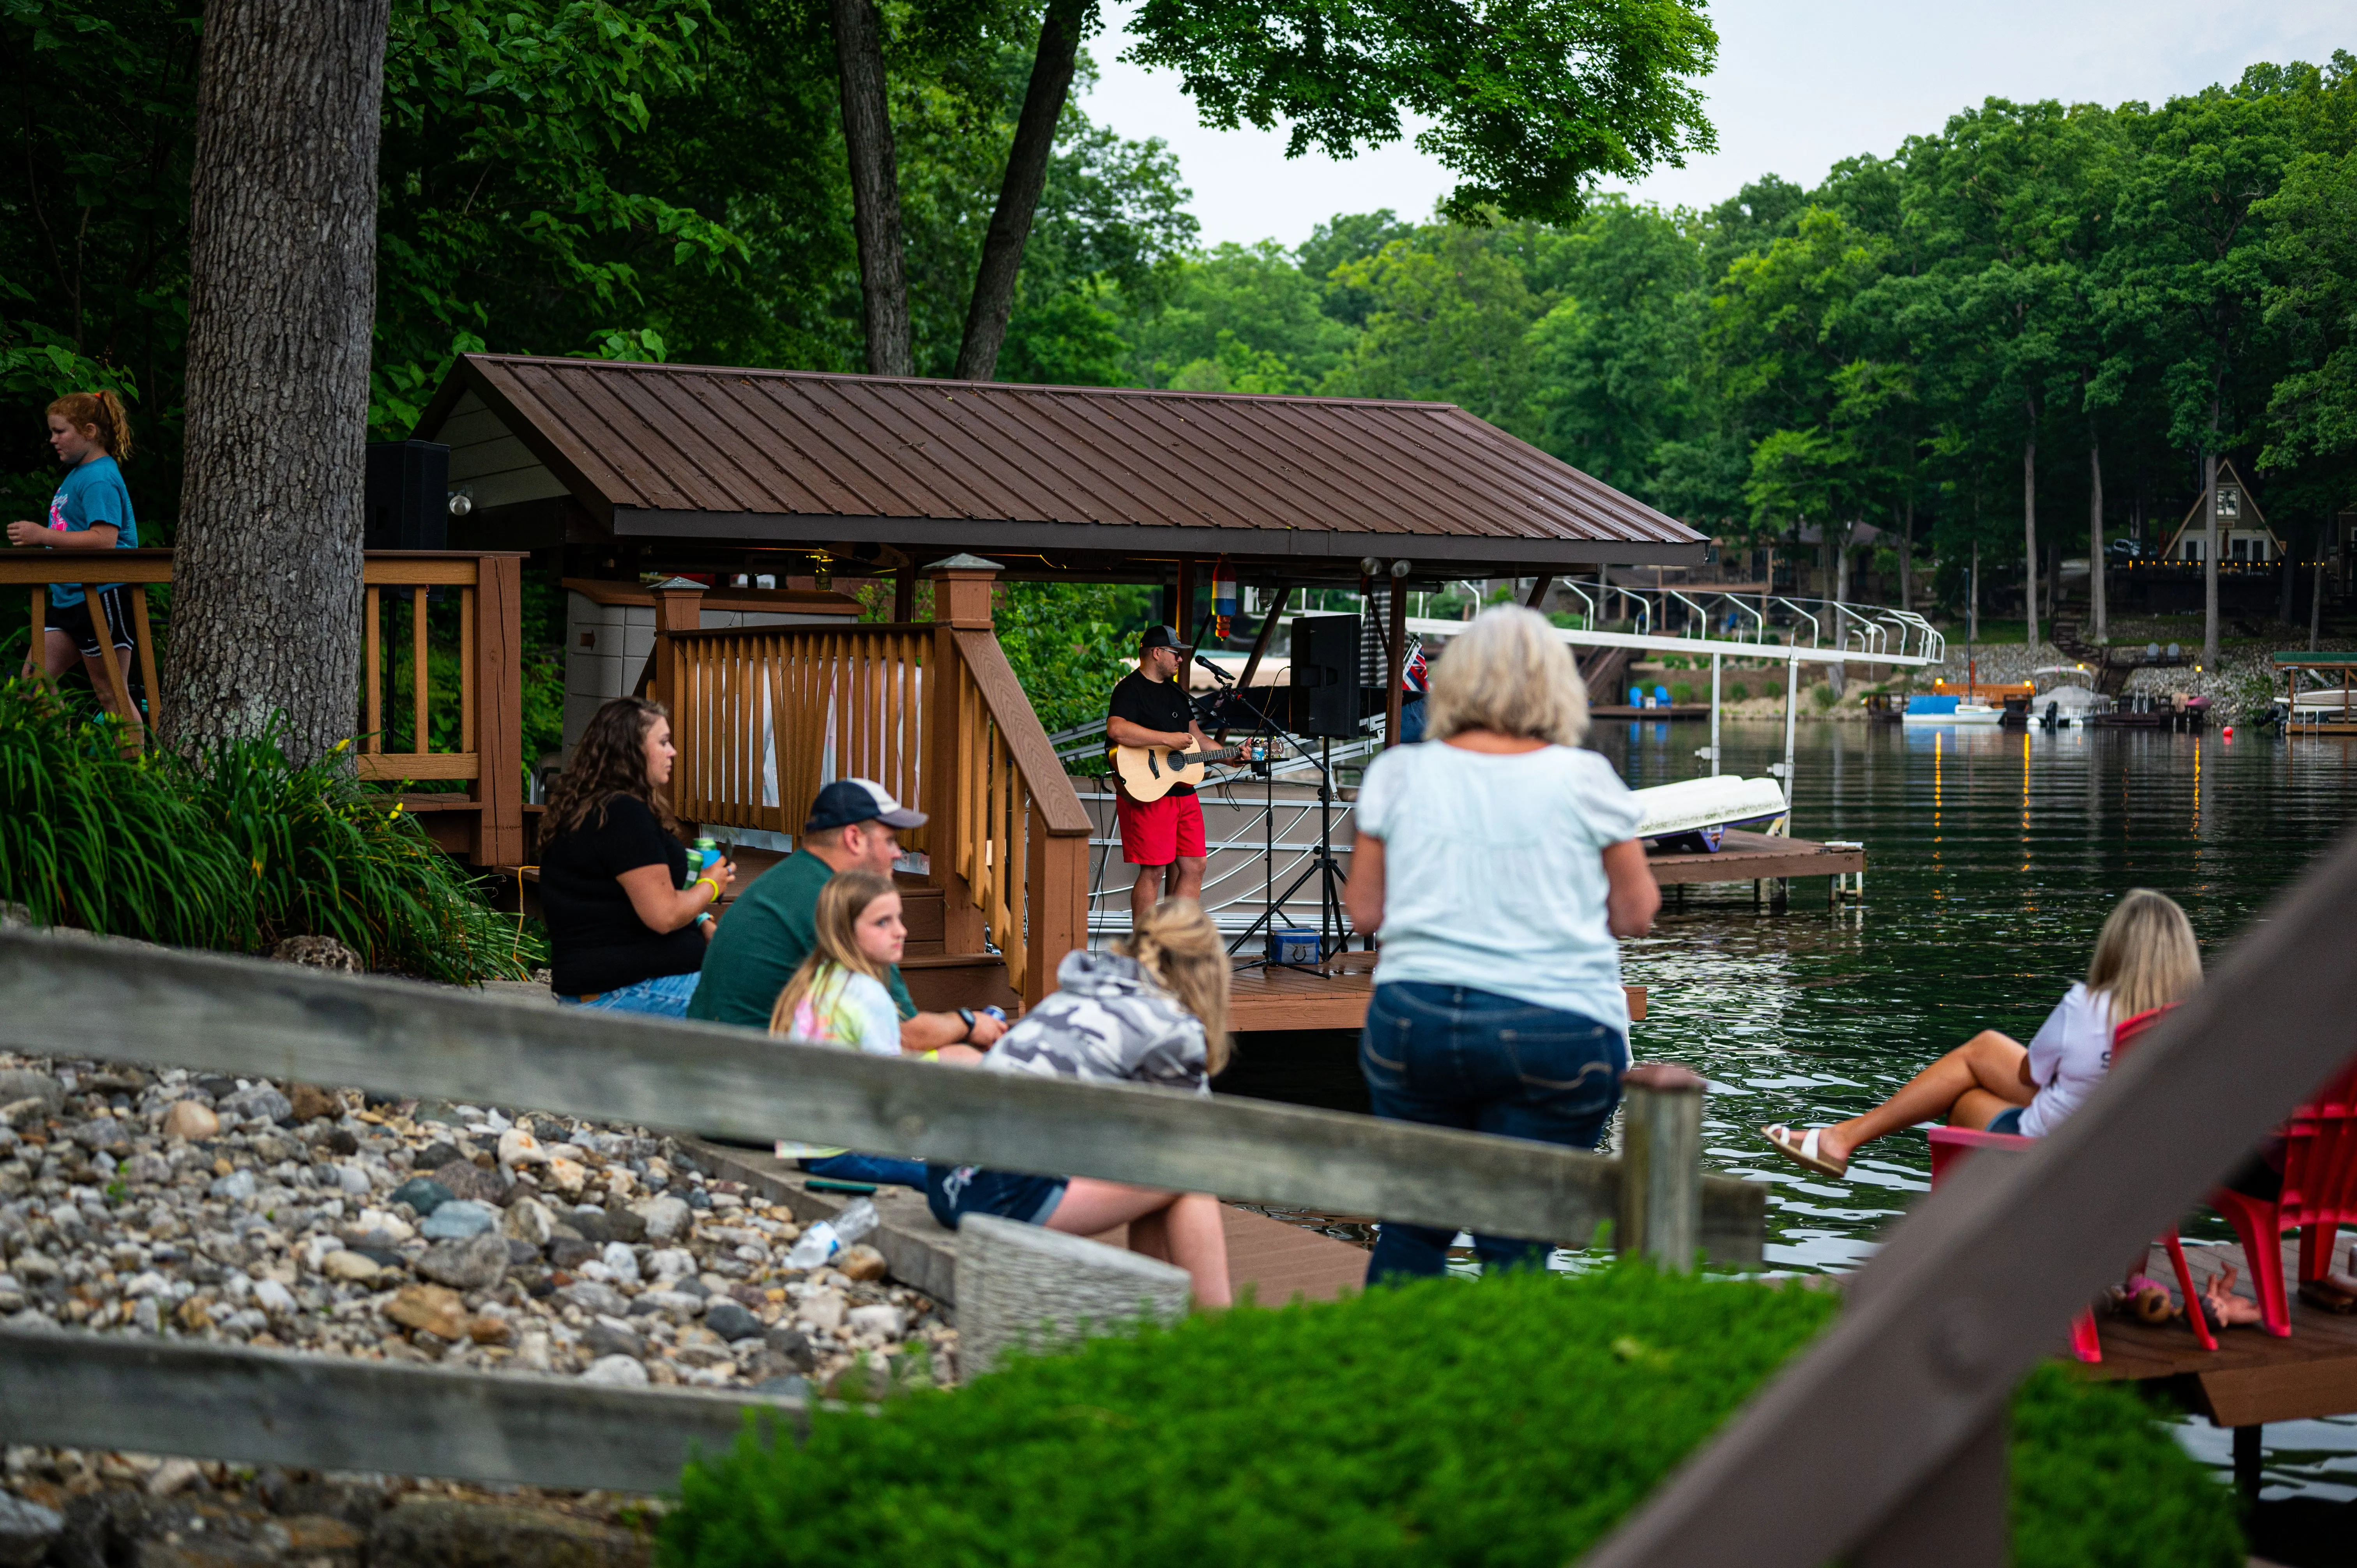 People relaxing by a lakeside with a small wooden cabin and dock in the background.